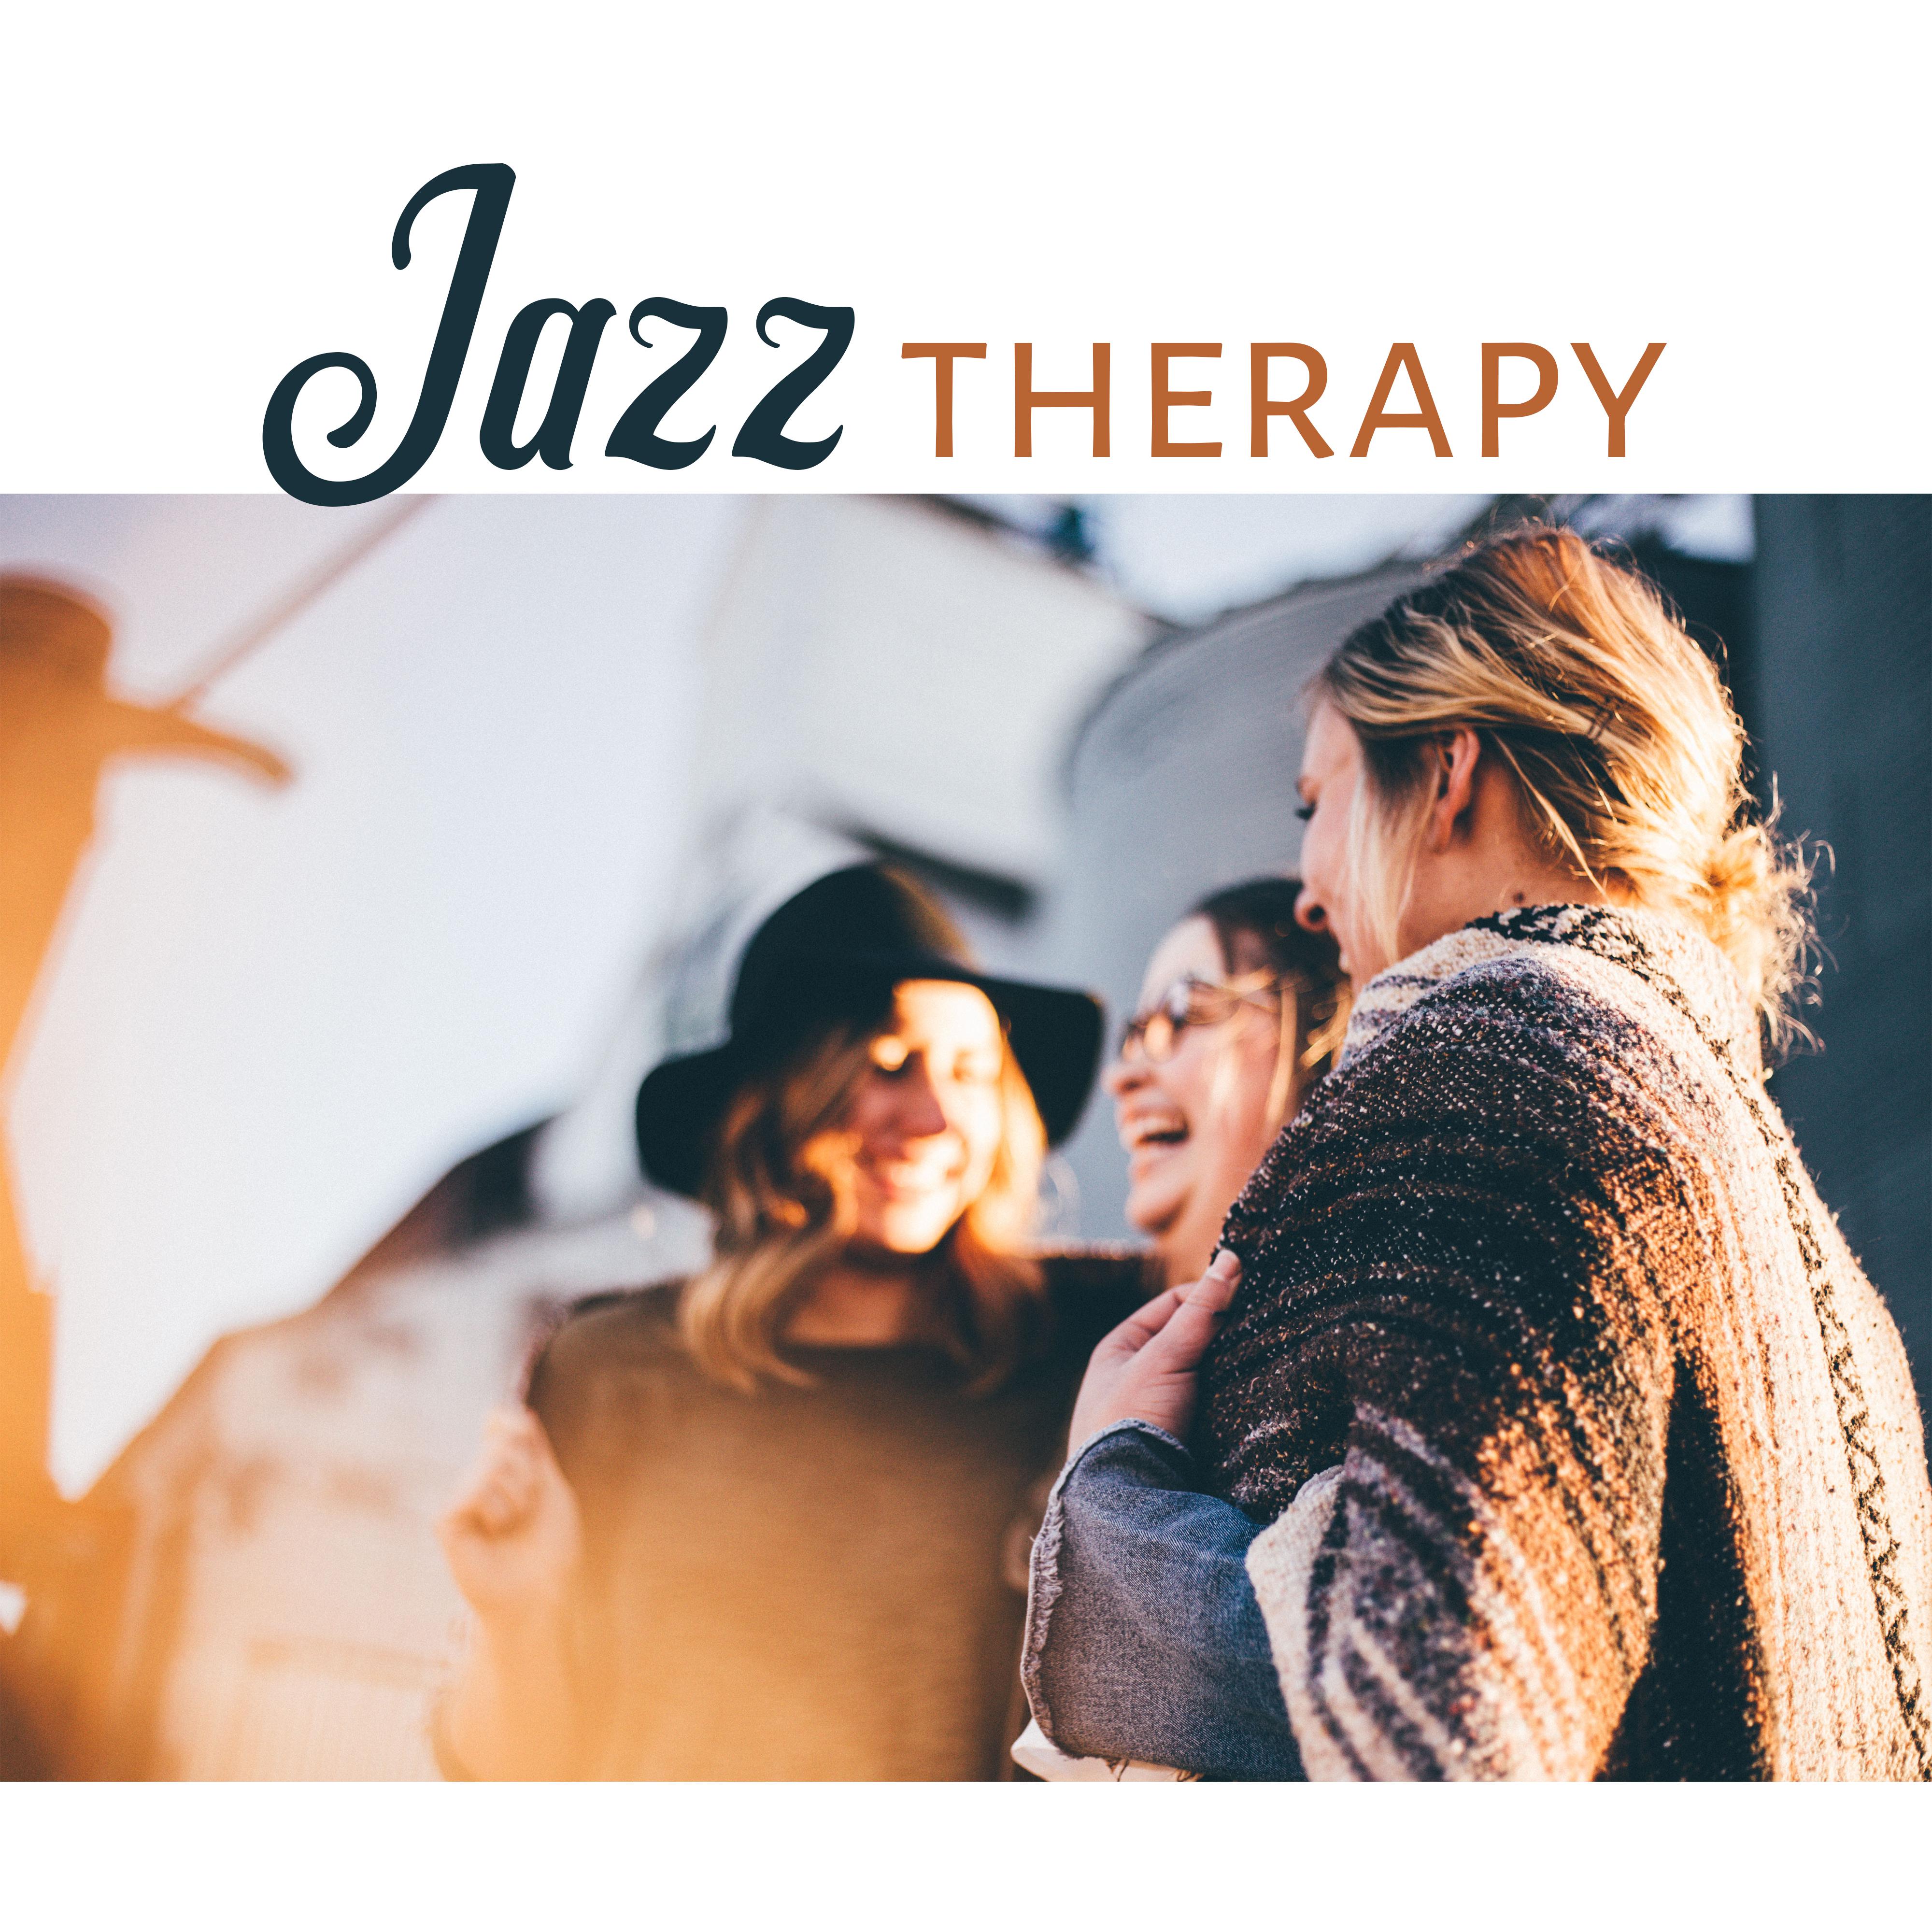 Jazz Therapy  Soothing Sounds for Relaxation, Healing, Chilled Jazz, Peaceful Mind, Soothing Guitar, Delicate Piano, Smooth Jazz at Night